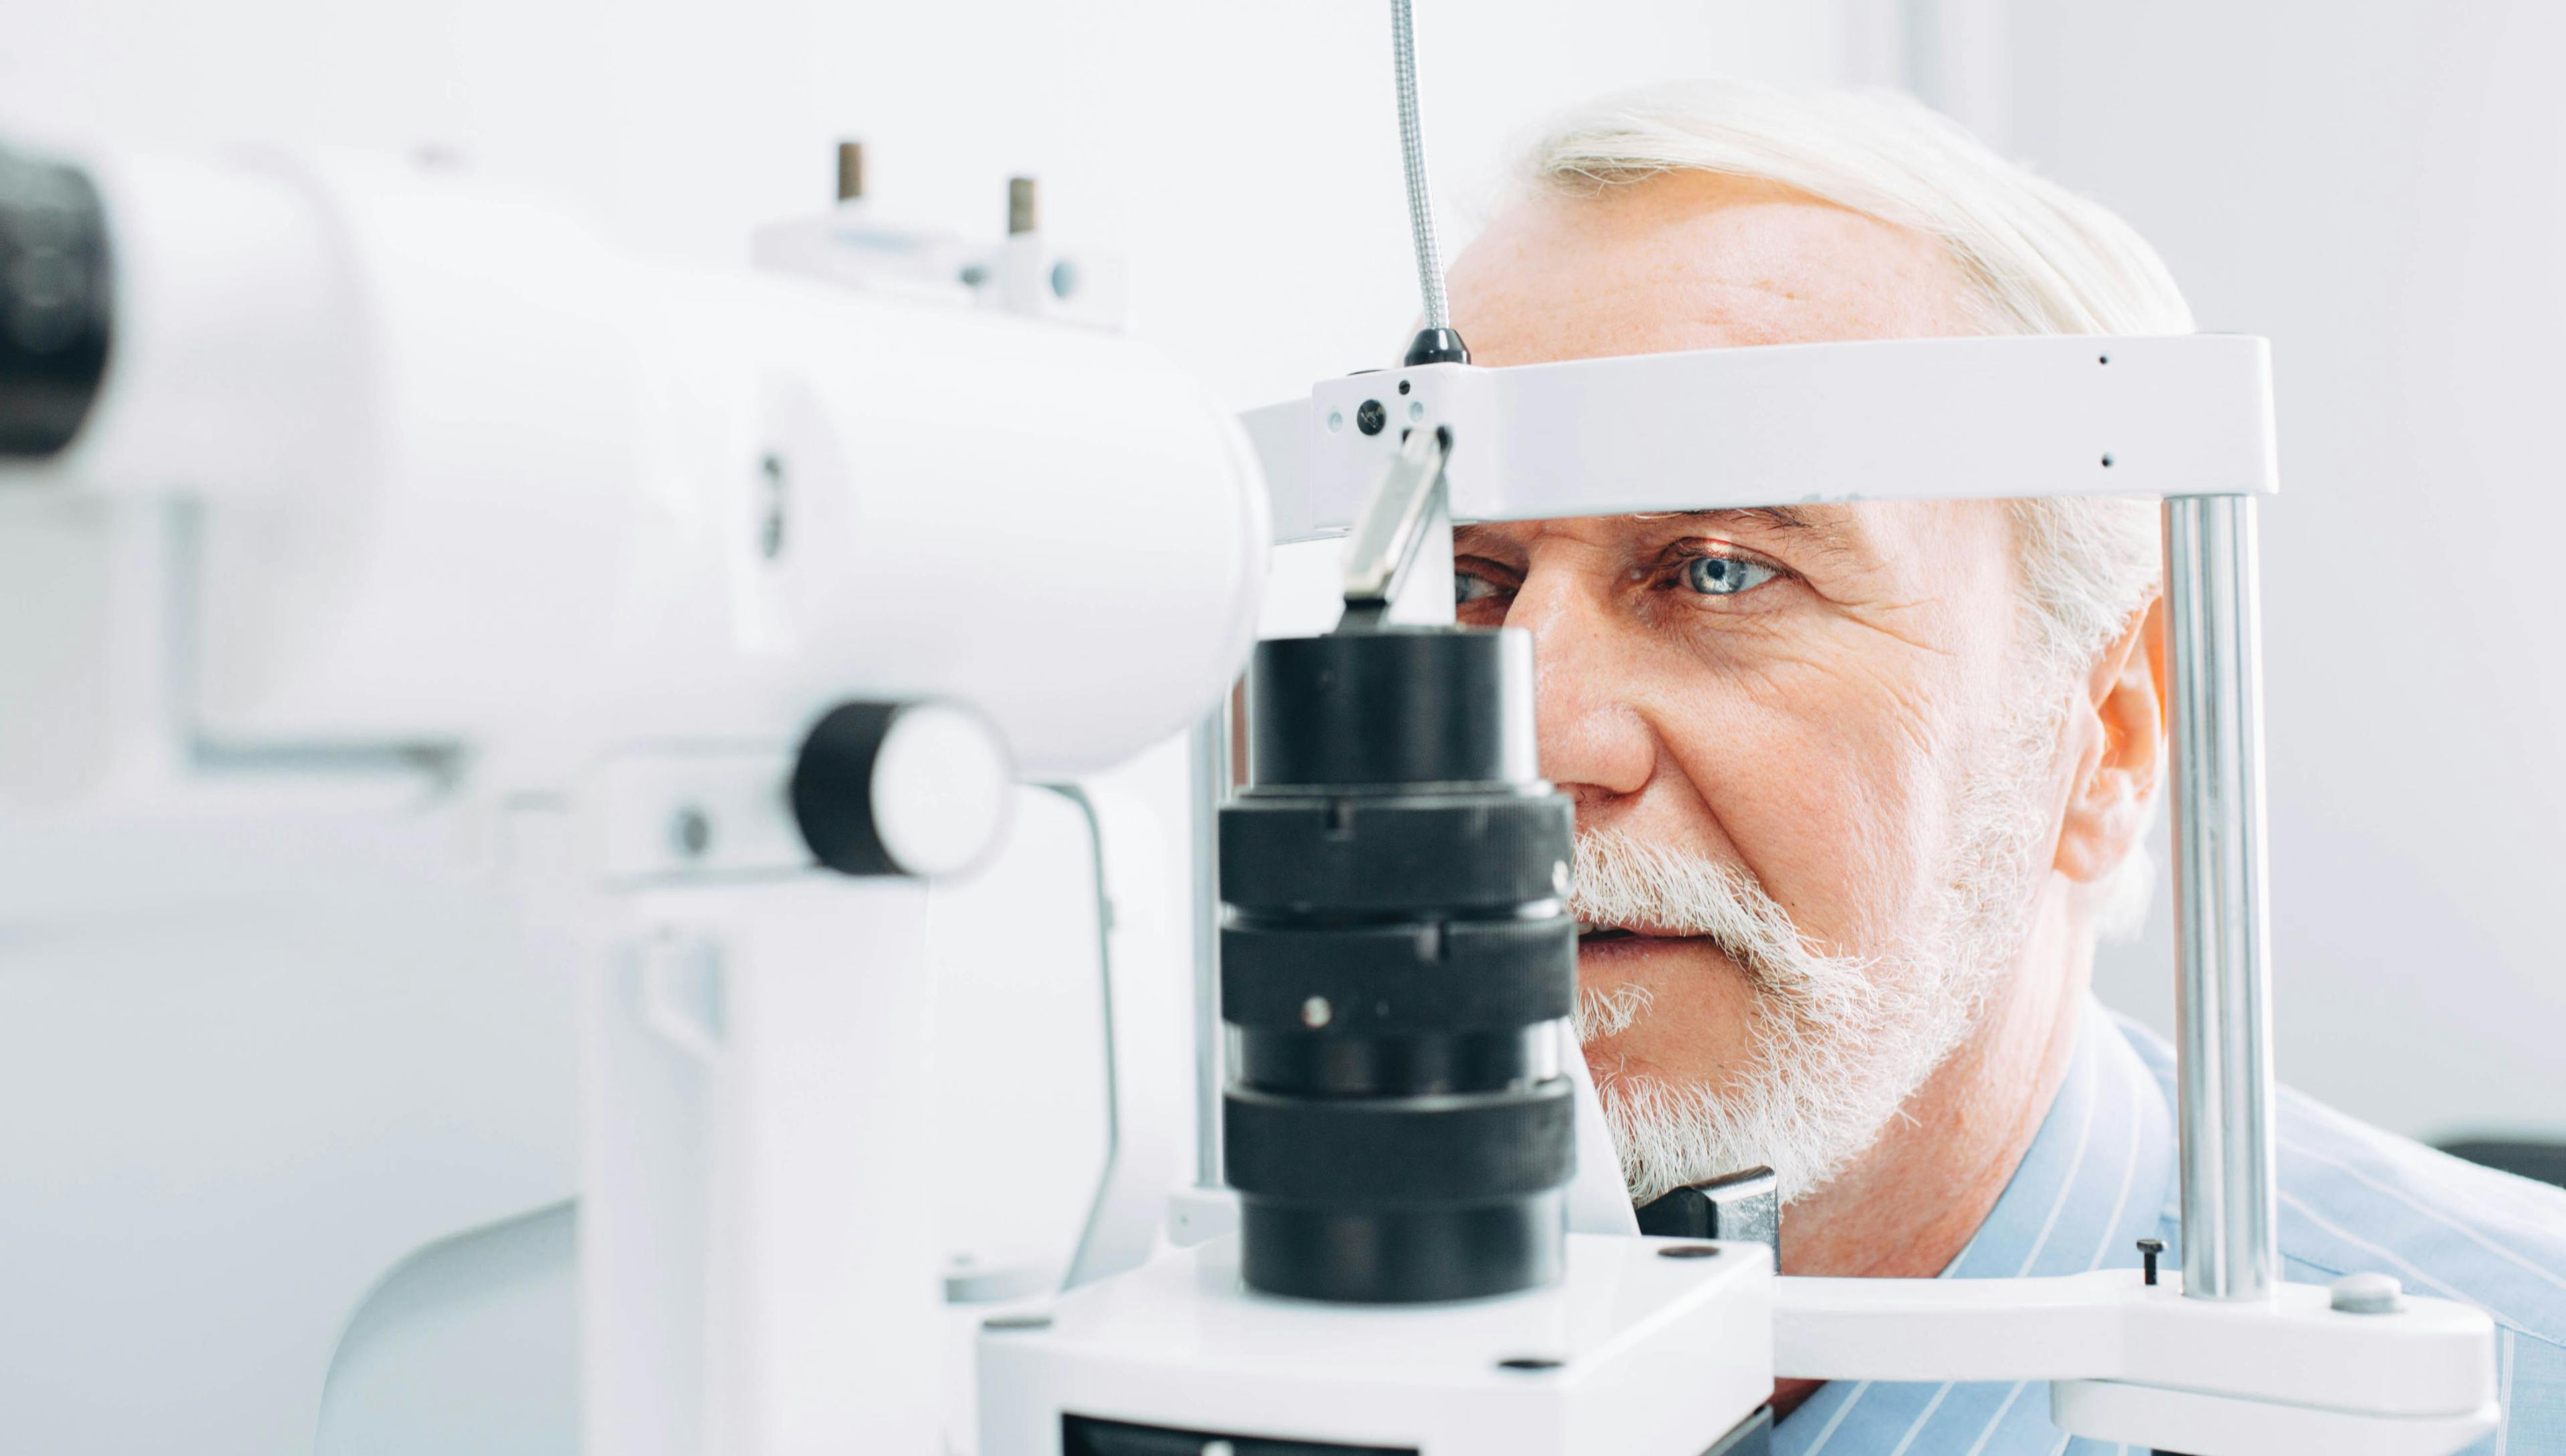 These findings may eventually lead to the development of imaging techniques that allow us to diagnose Alzheimer’s disease earlier and more accurately and monitor its progression noninvasively by looking through the eye. (Adobe Stock image)